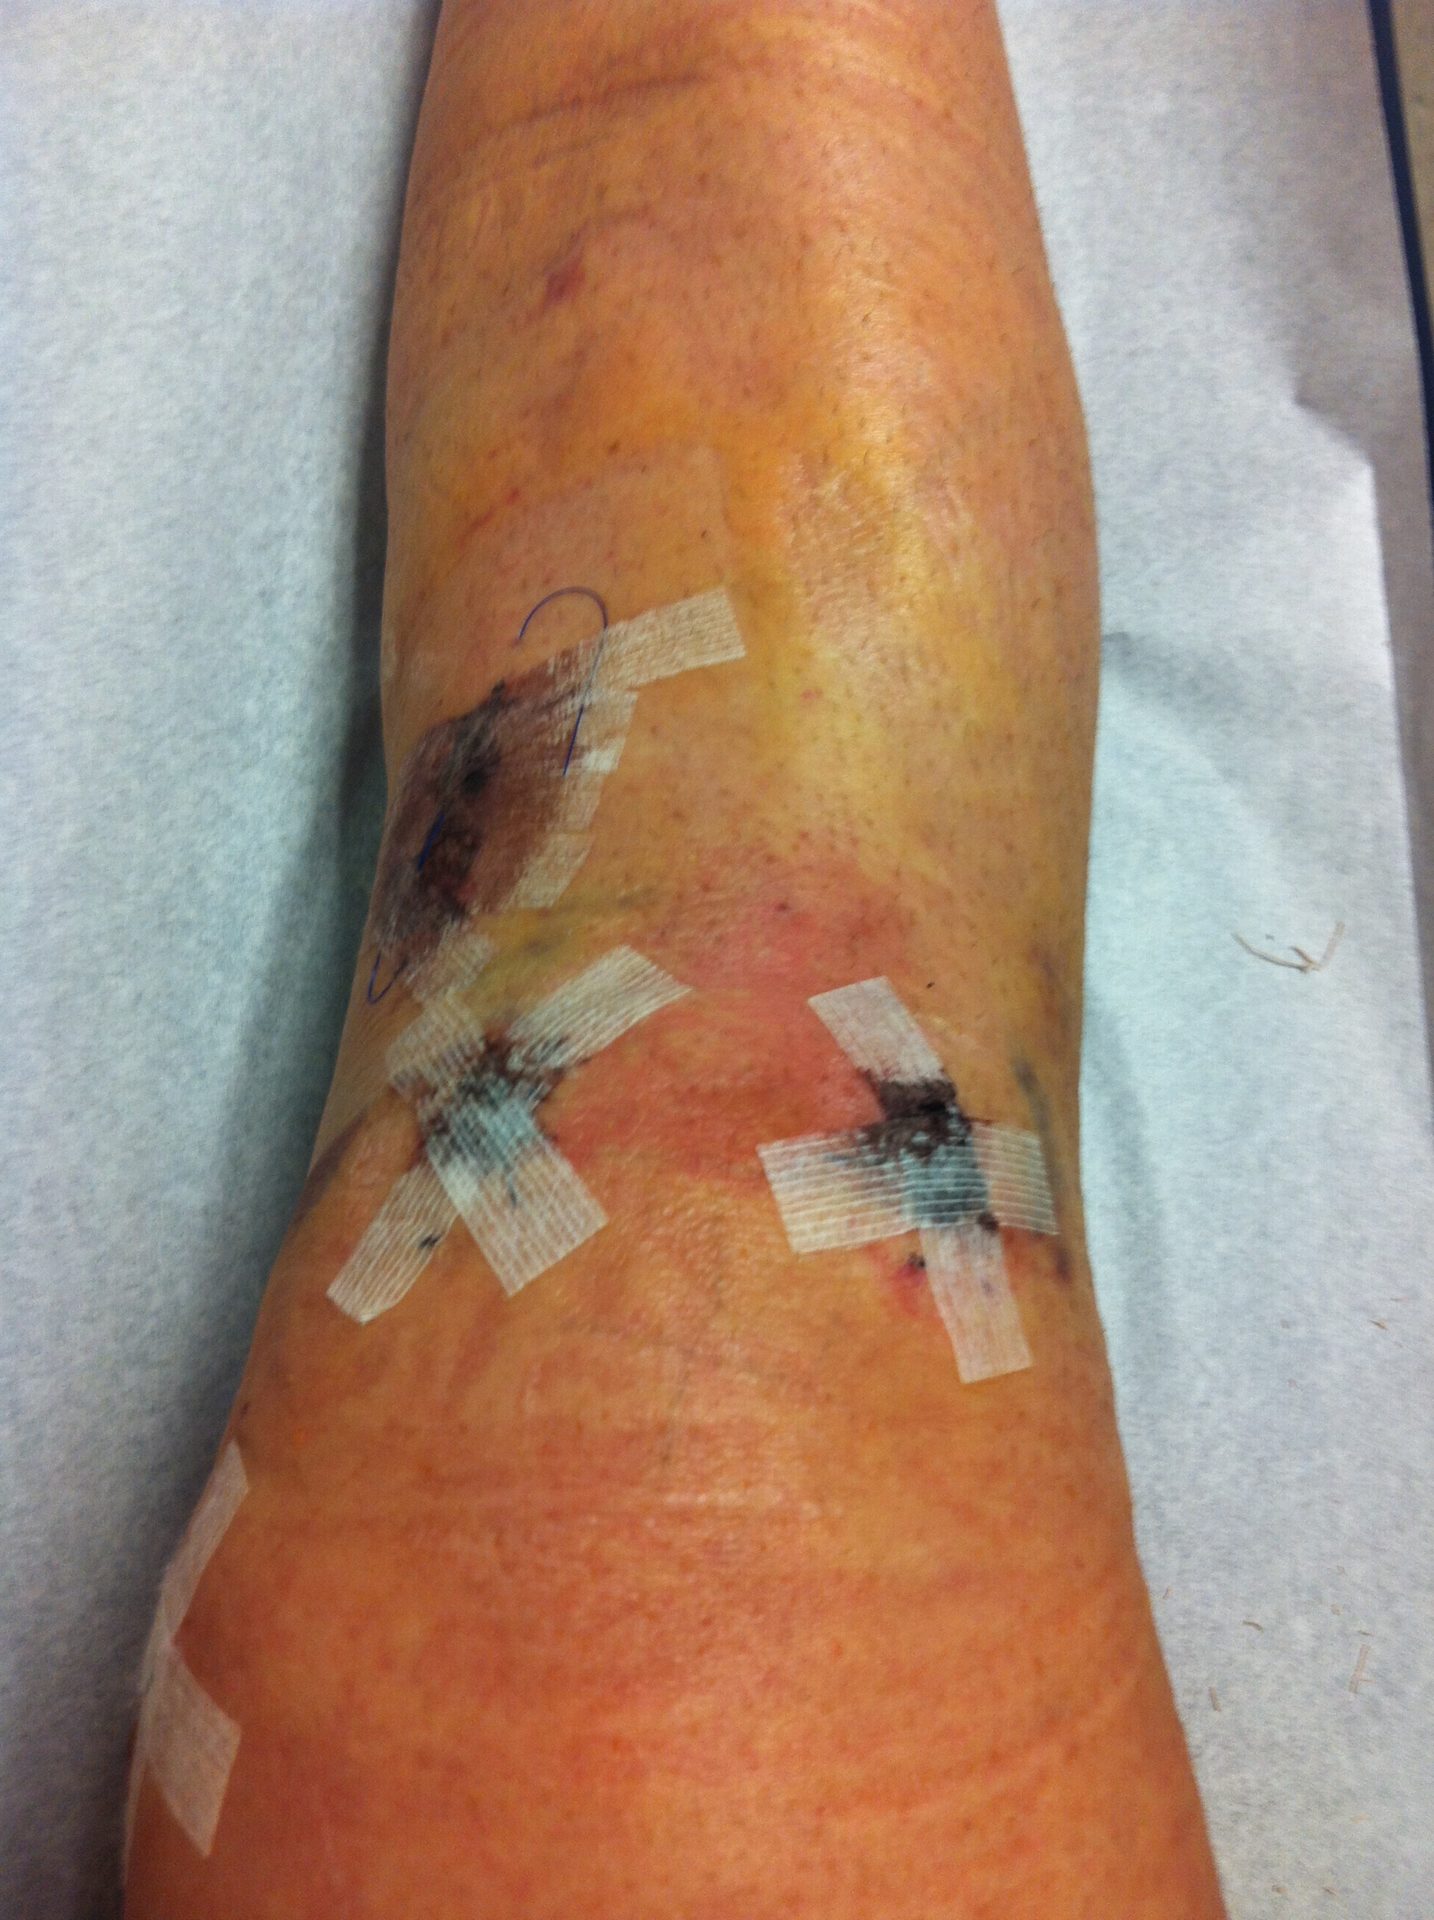 Photo post knee-surgery and pre stem cell injection